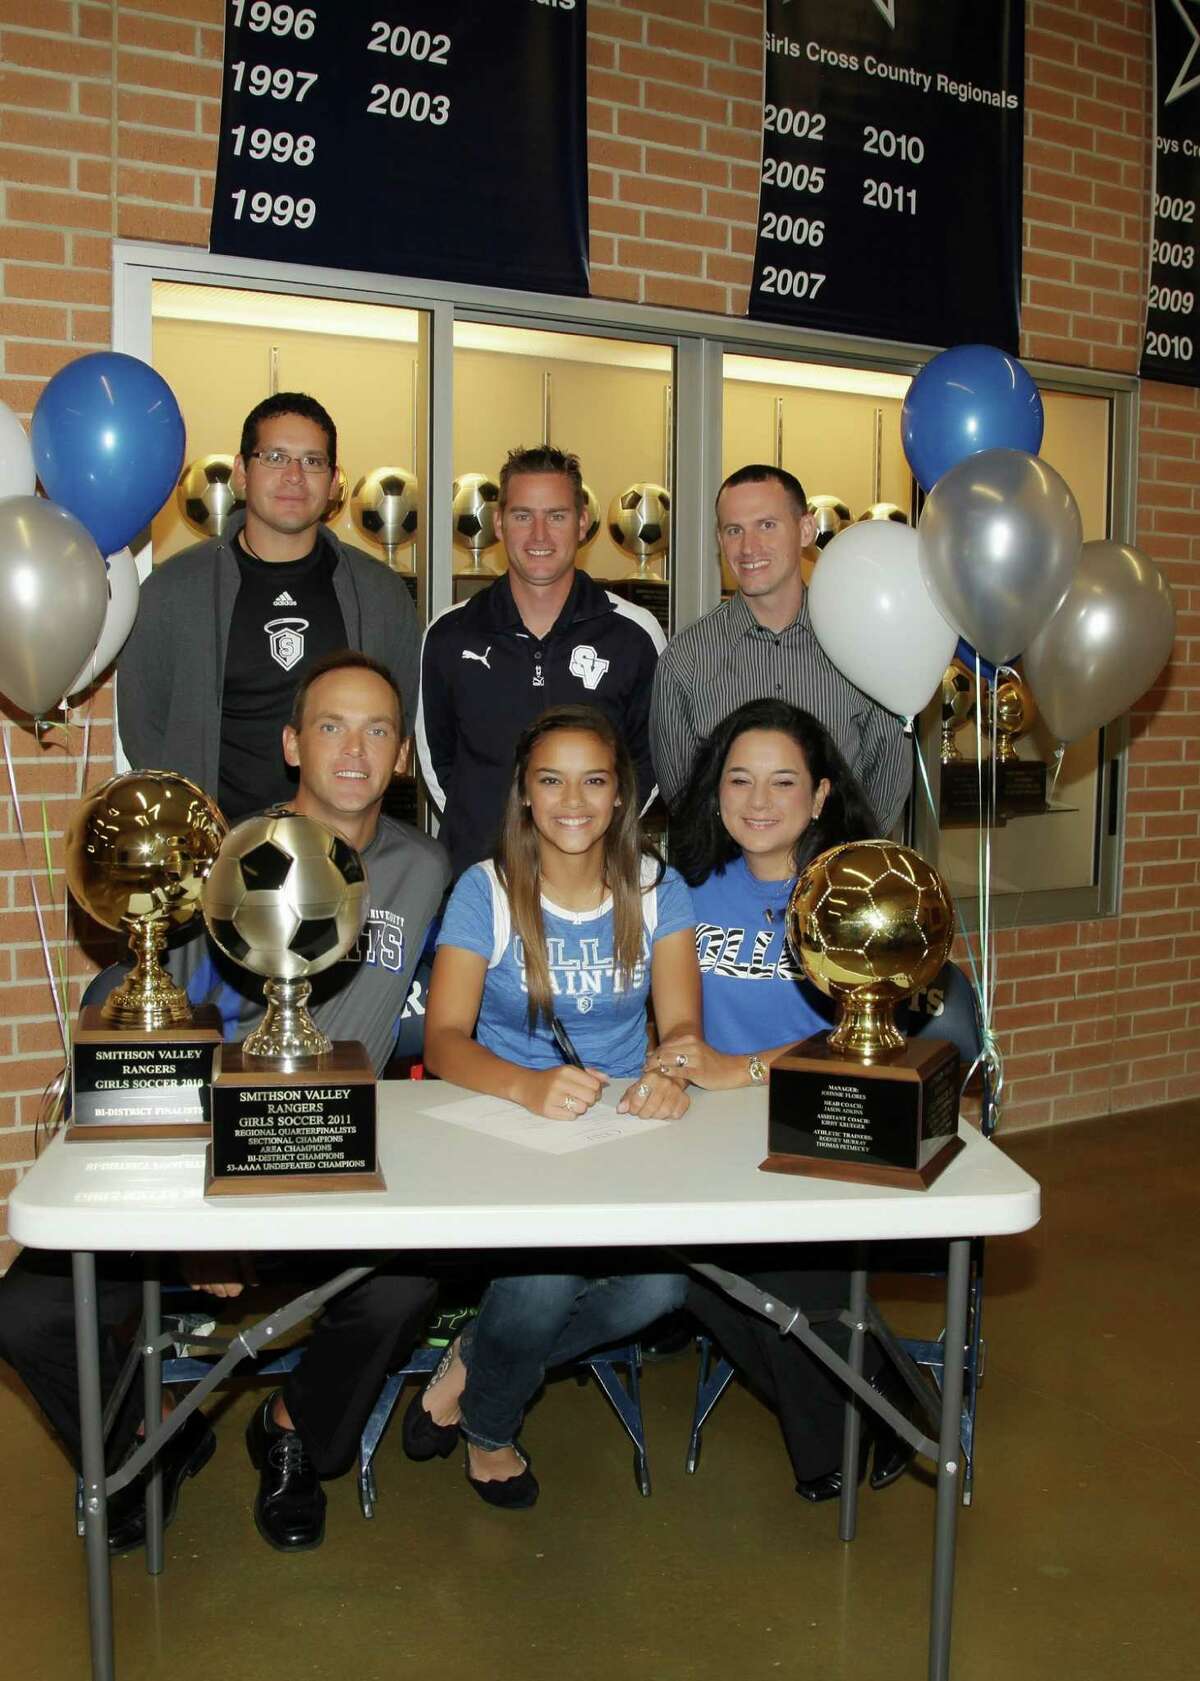 Smithson Valley High senior Pauline Fields signed her letter of intent Dec. 7 to play soccer at Our Lady of the Lake University. Pictured in the front row (l-r) are her father, Michael Fields, Fields and her mother Lisa. In the back row are Our Lady of the Lake soccer coach Arthur Salazar, SVHS girls soccer coach Jason Adkins and club soccer coach Robbie Babcock.